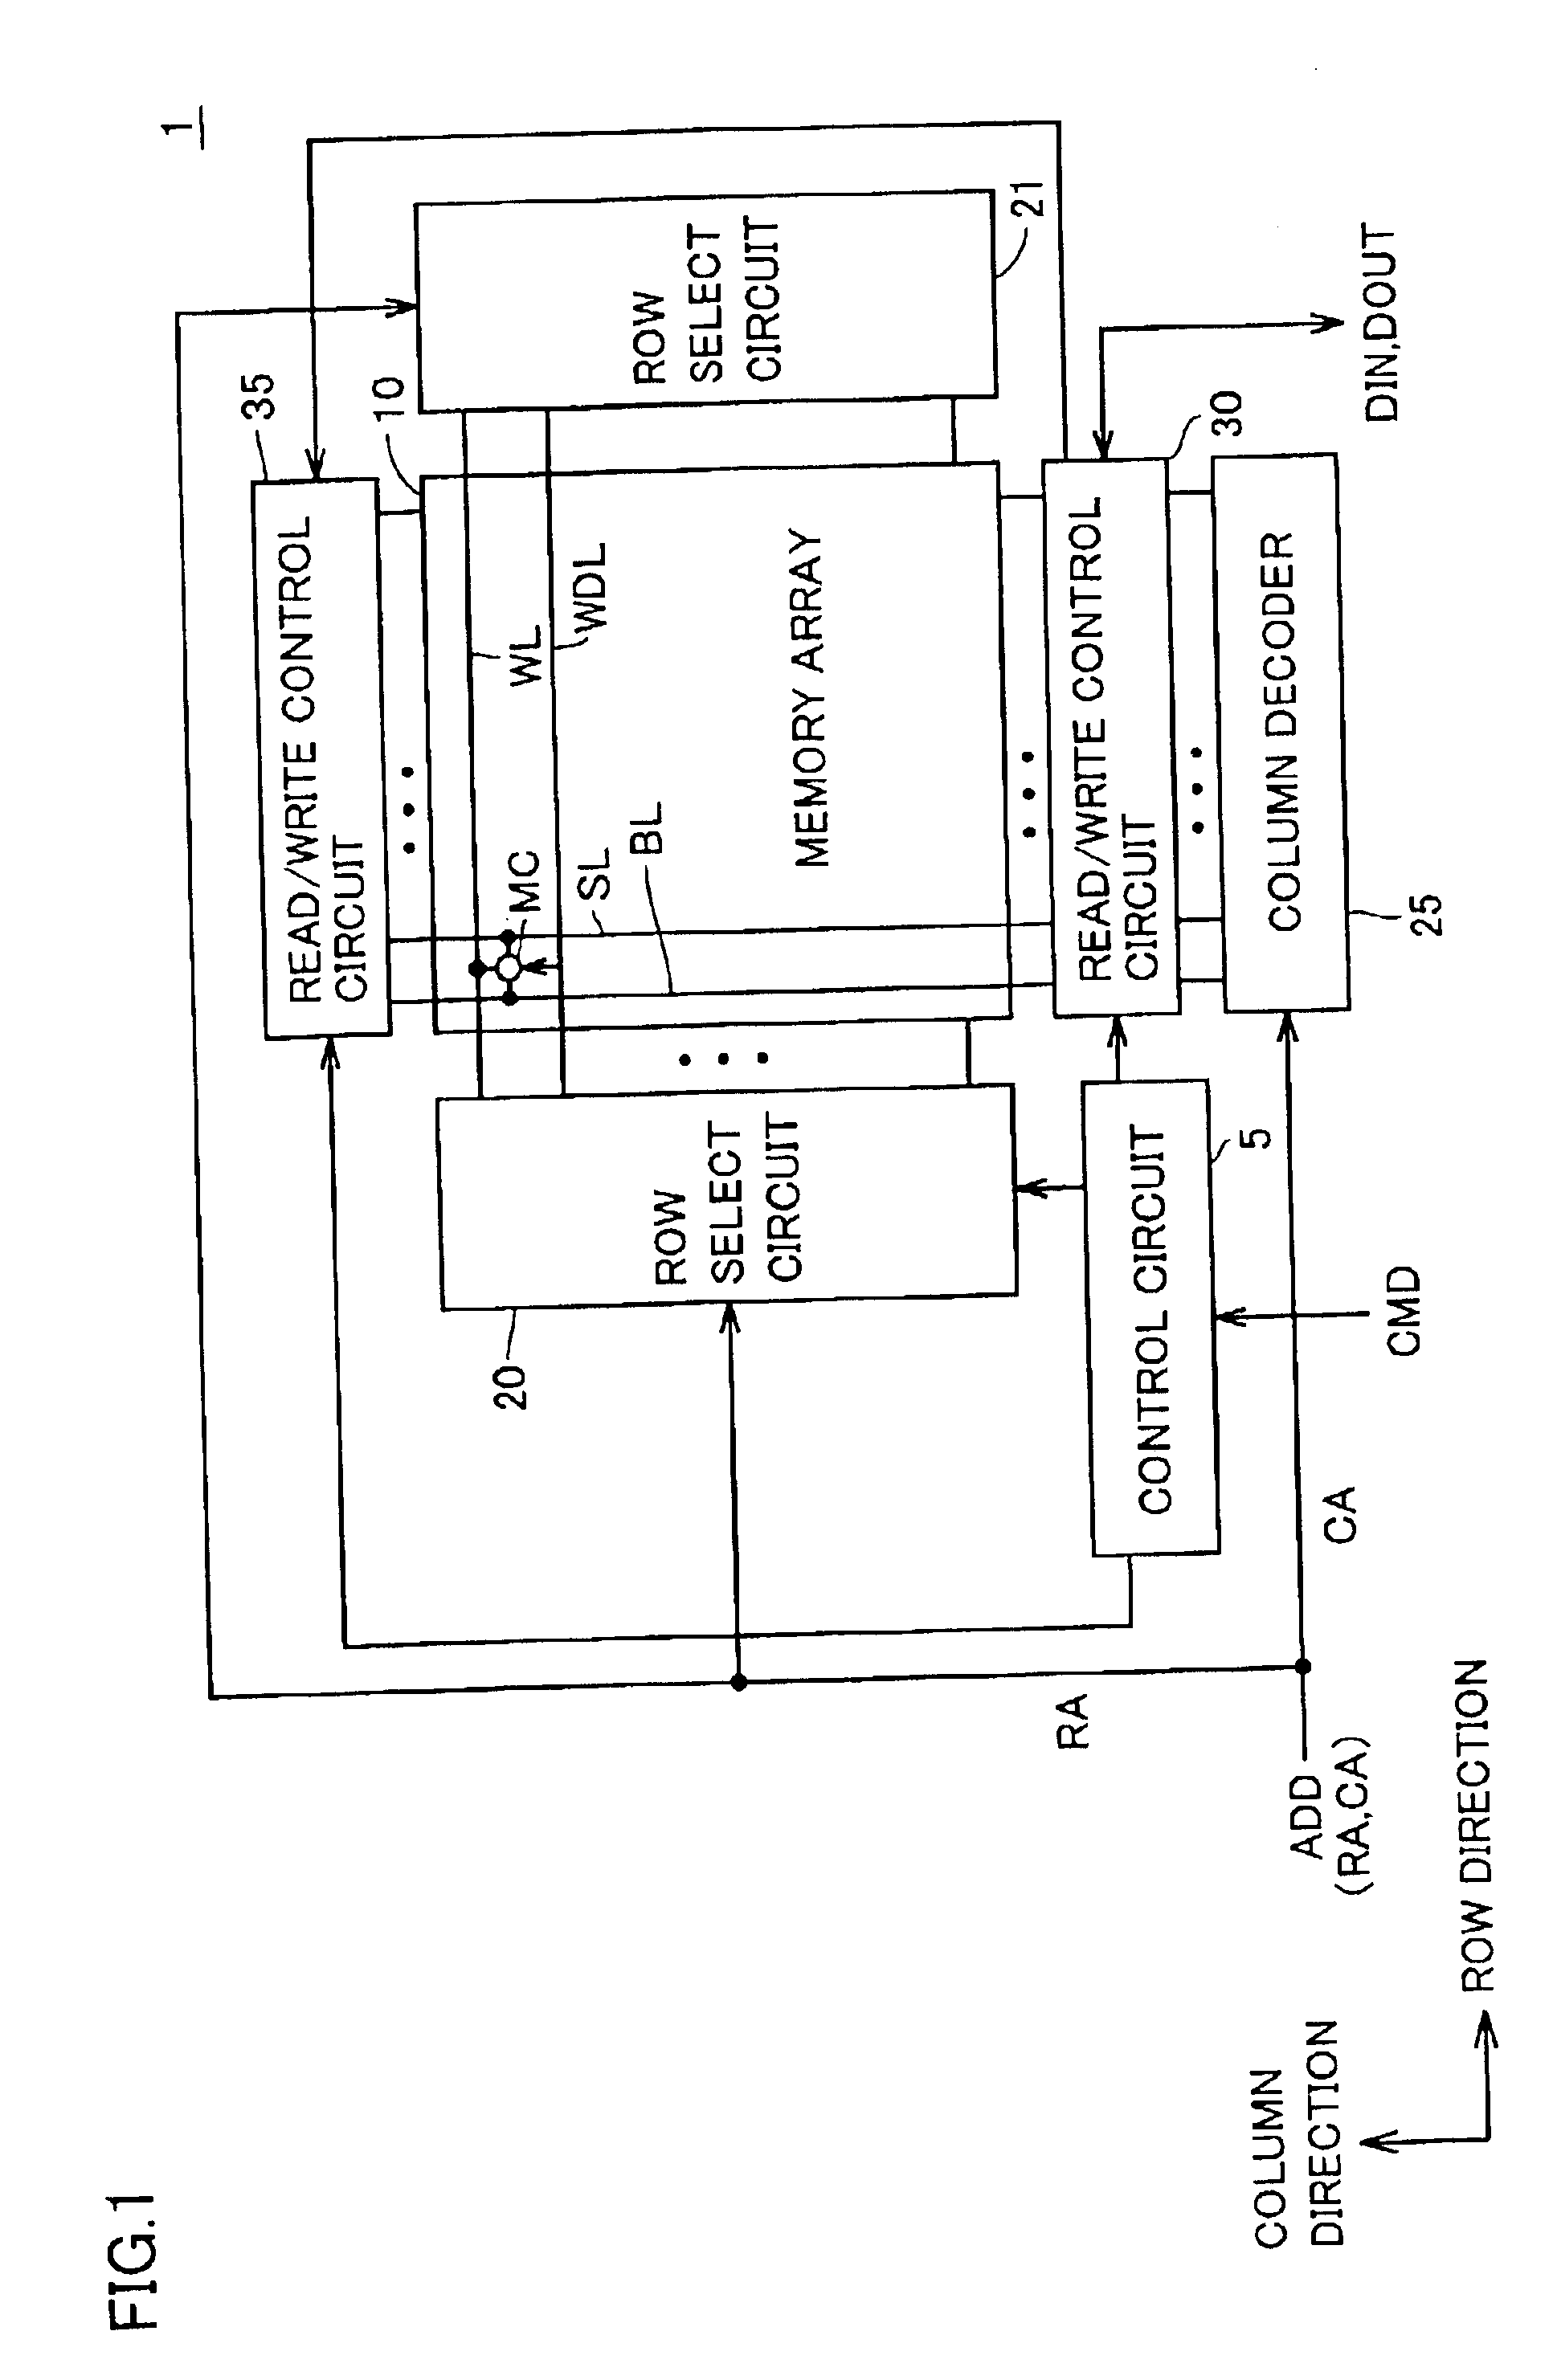 Thin film magnetic memory device executing self-reference type data read